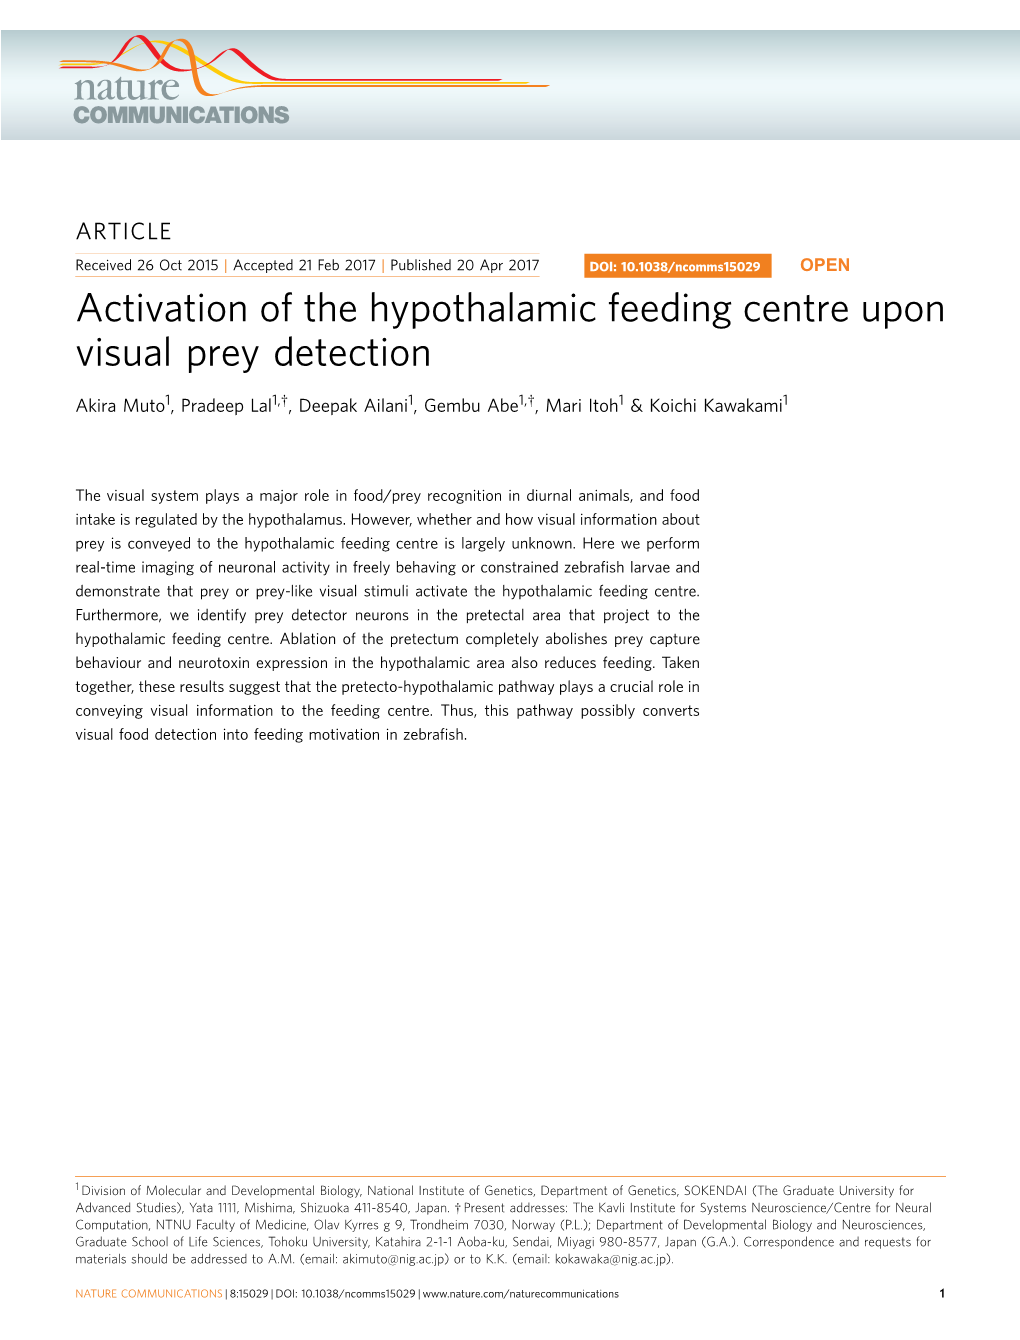 Activation of the Hypothalamic Feeding Centre Upon Visual Prey Detection